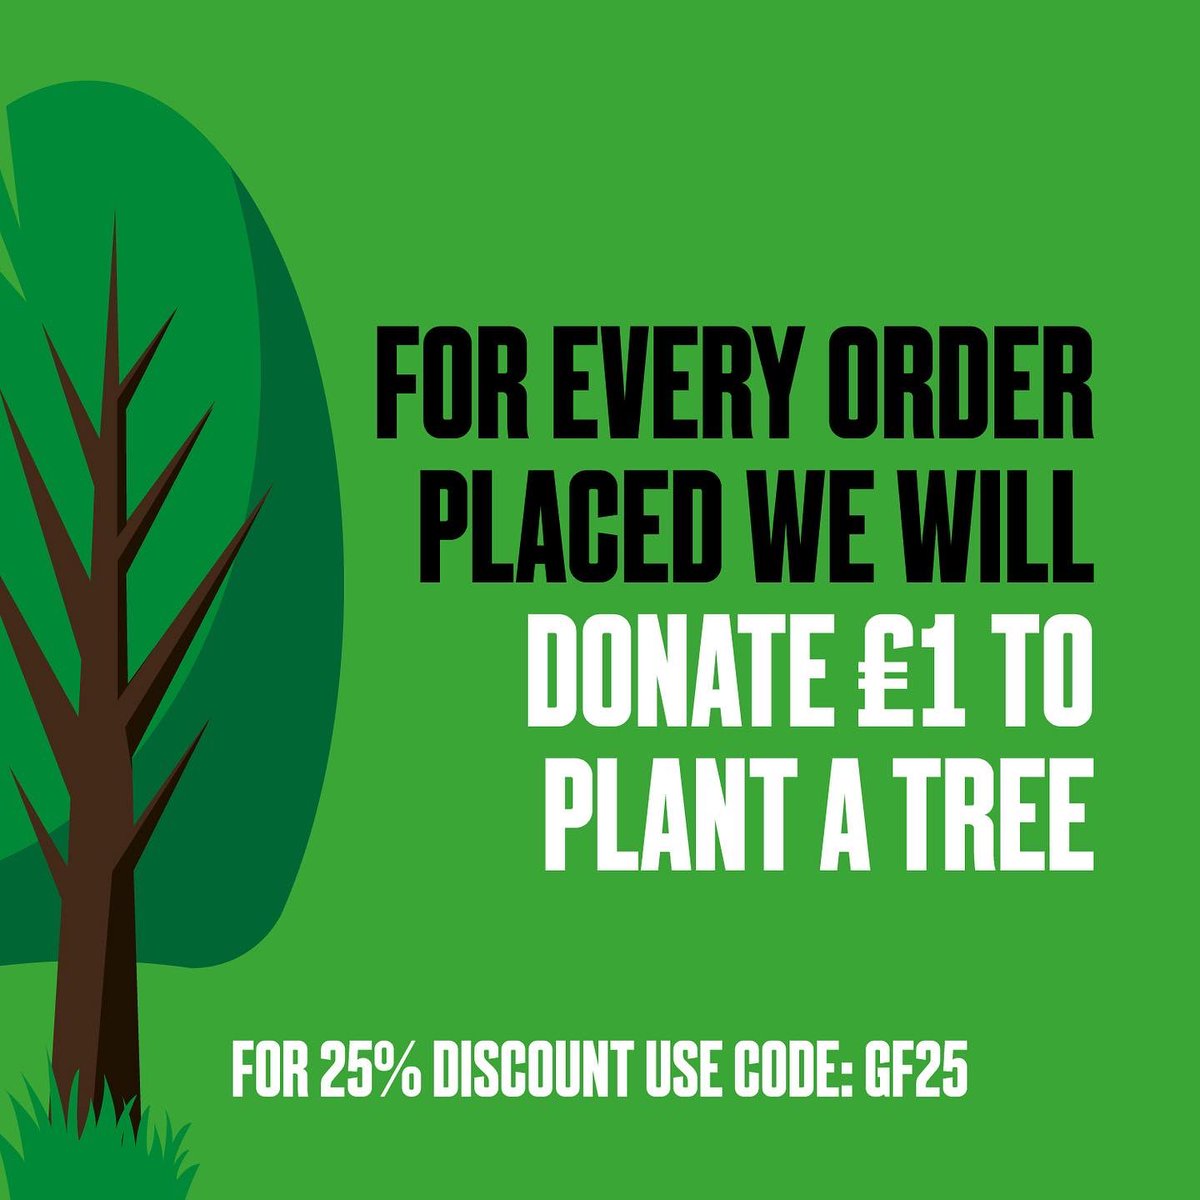 Our Green Friday sale ends tonight at midnight. Save 25%, and we’ll donate £1 from every order to help plant more trees 🌲 🌳 otesports.co.uk